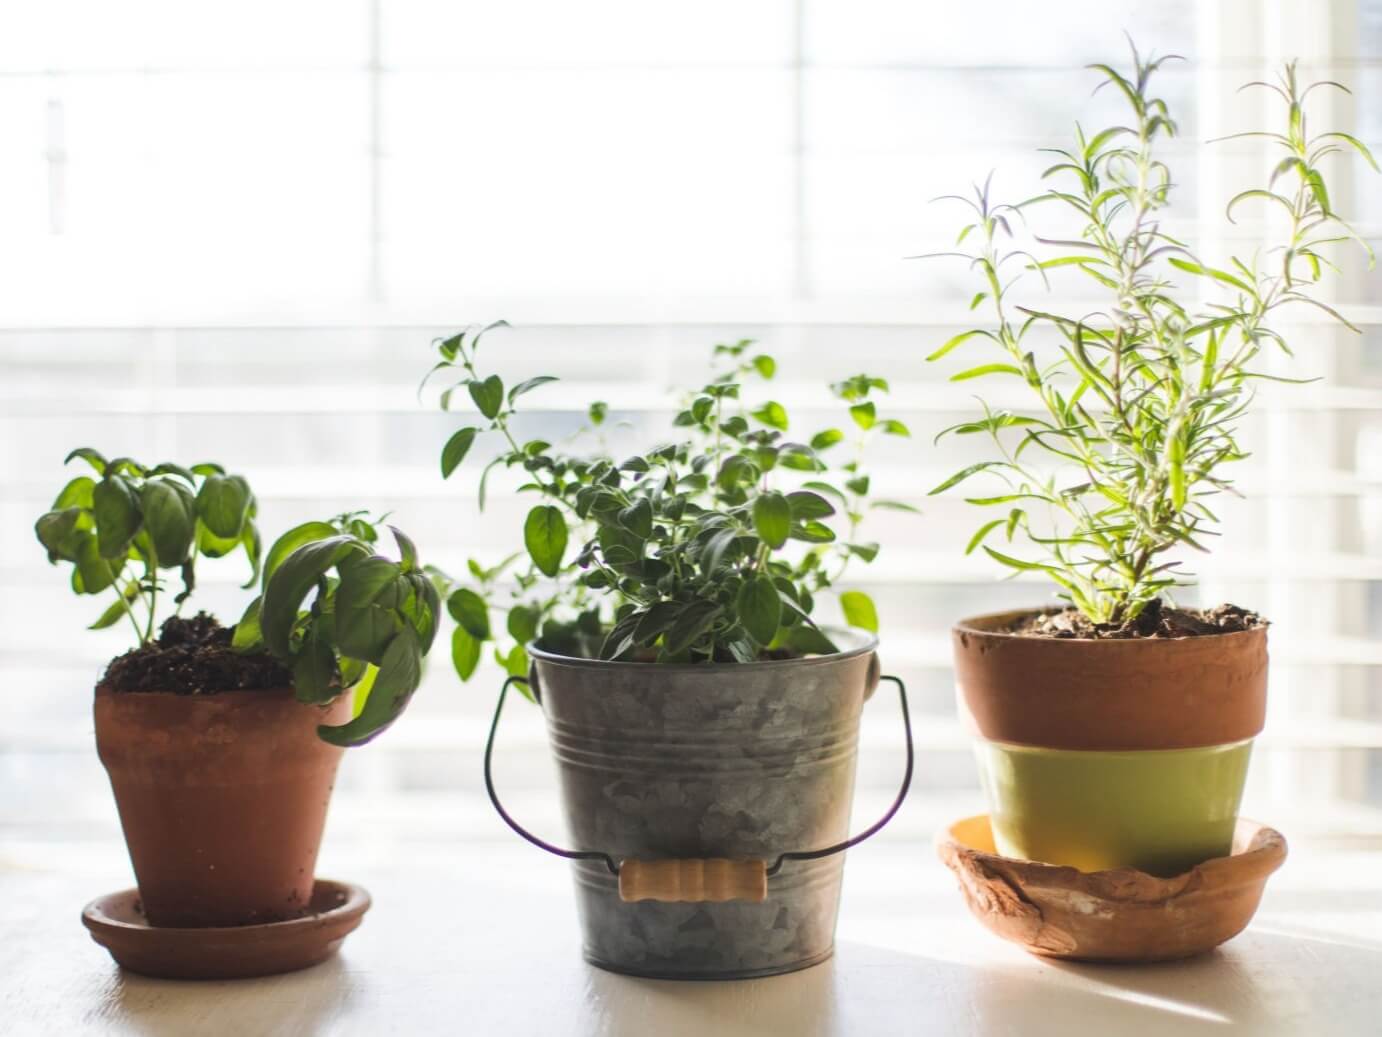 Image of three indoor potted plants